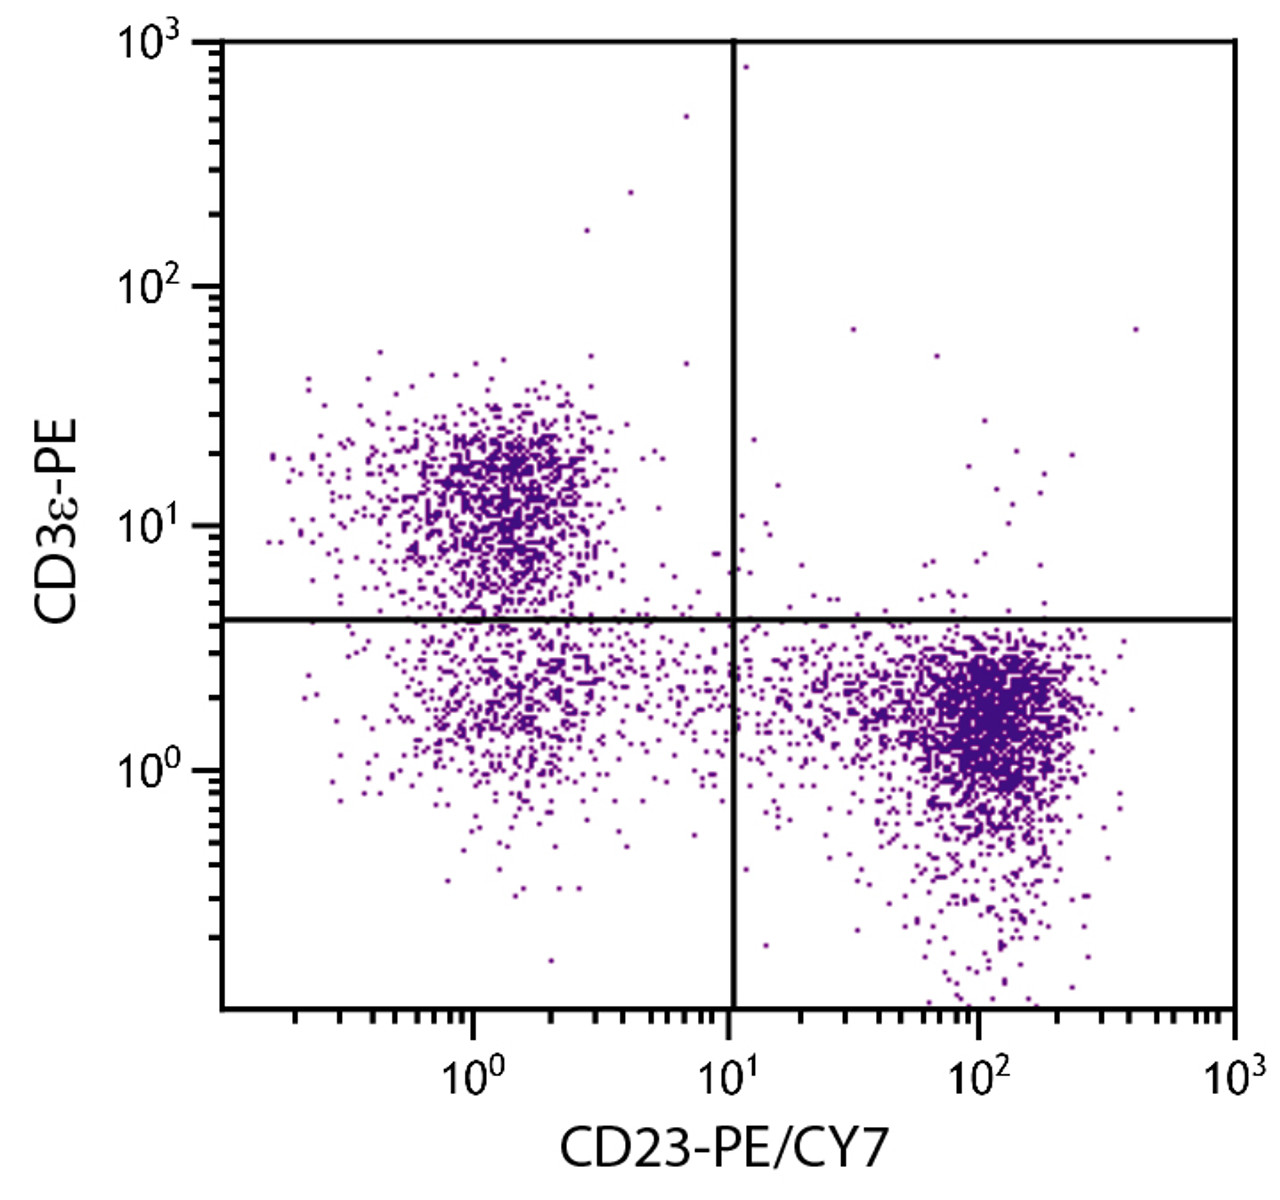 BALB/c mouse splenocytes were stained with Rat Anti-Mouse CD23-PE/CY7 (Cat. No. 98-689) and Rat Anti-Mouse CD3?-PE .